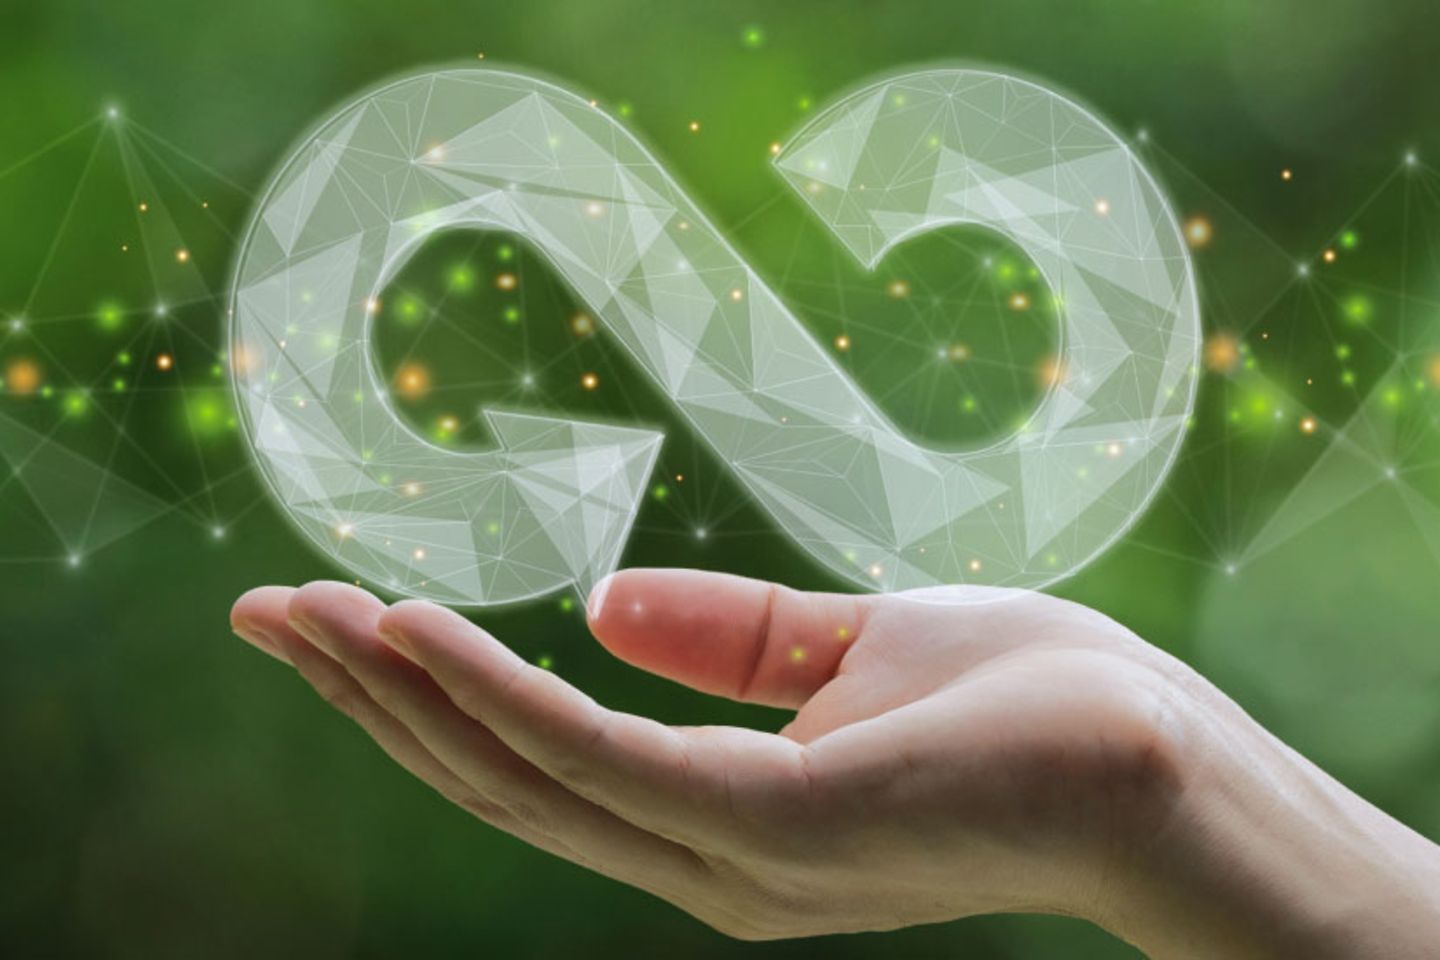 A hand holds an infinity symbol against a green background